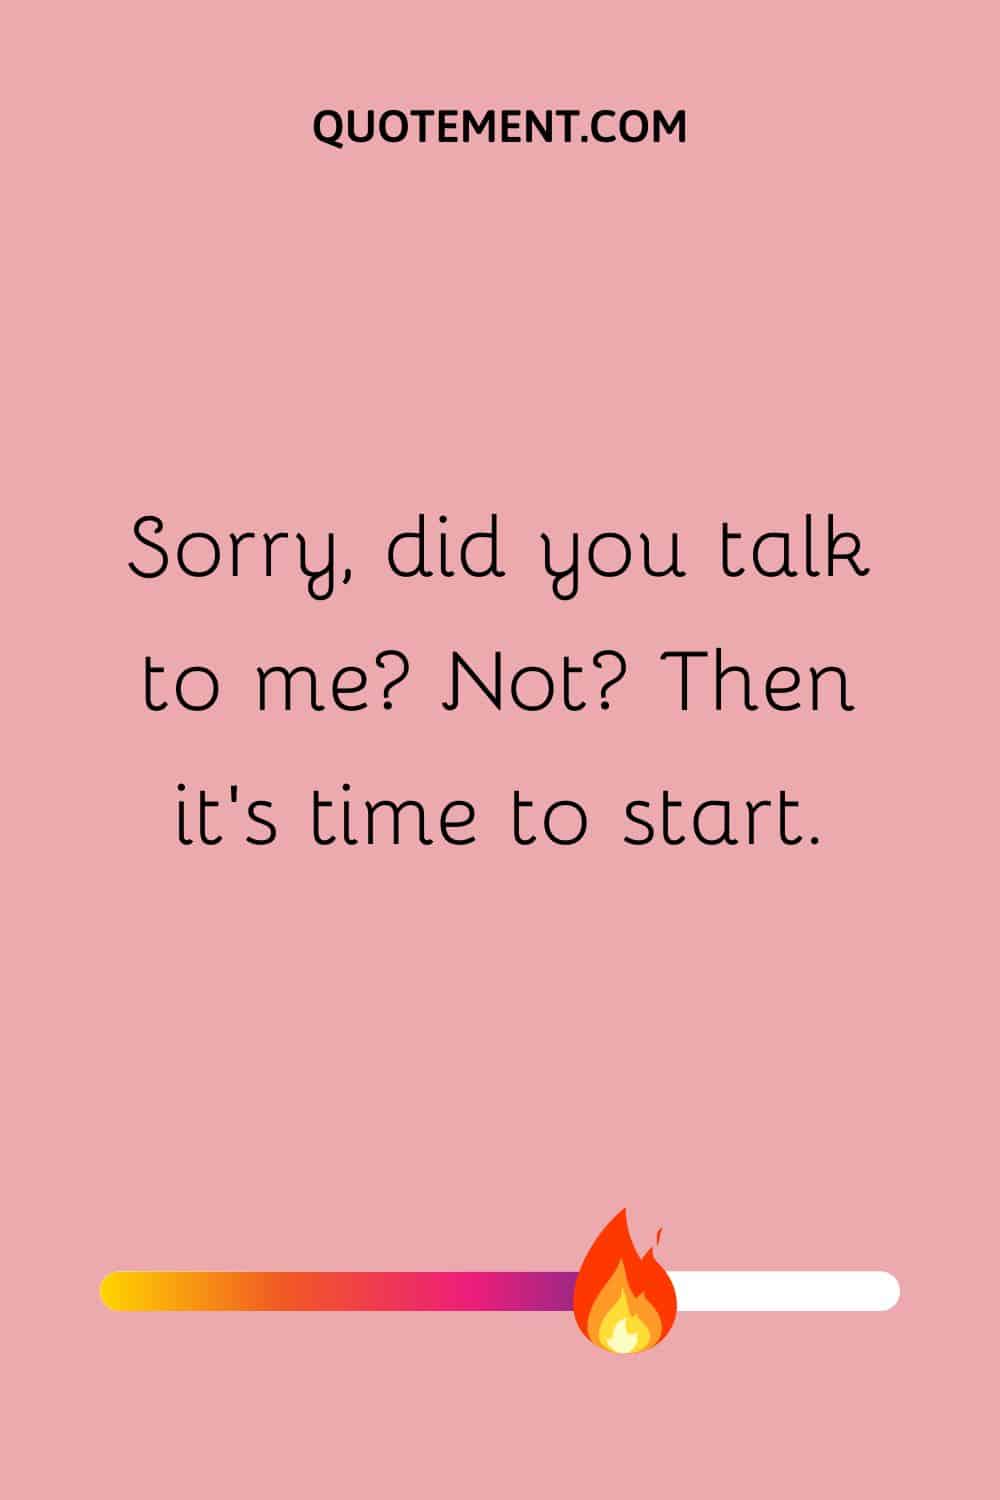 Sorry, did you talk to me